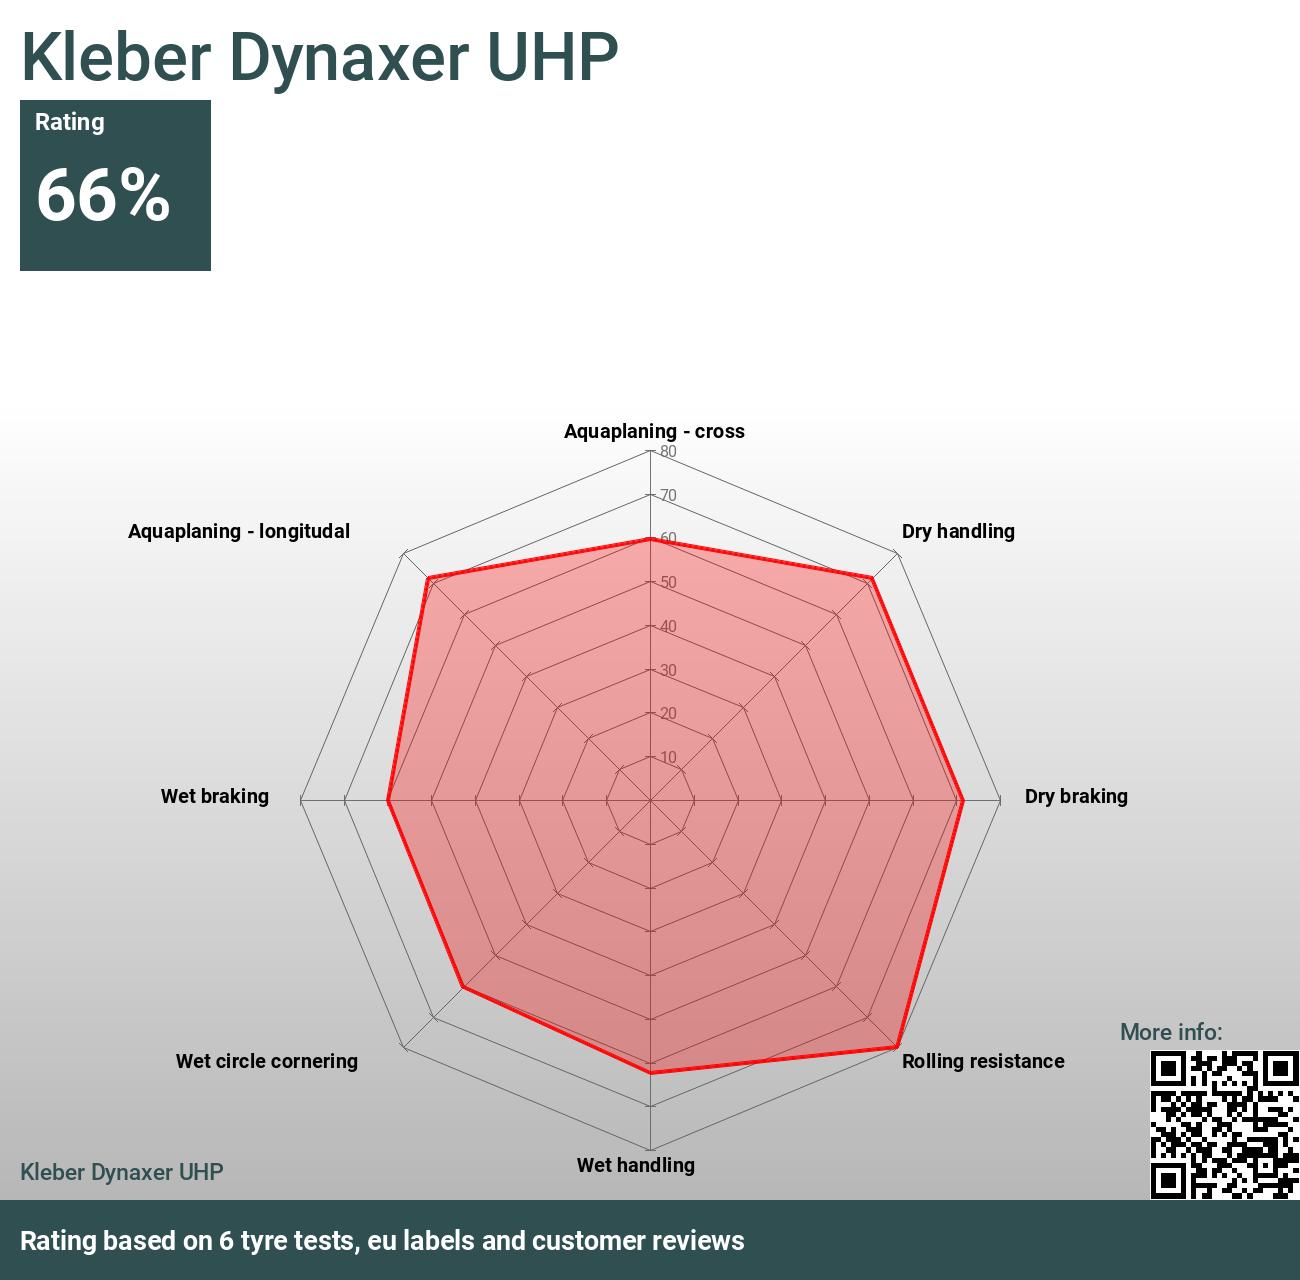 Kleber Dynaxer UHP tests 2024 and - Reviews